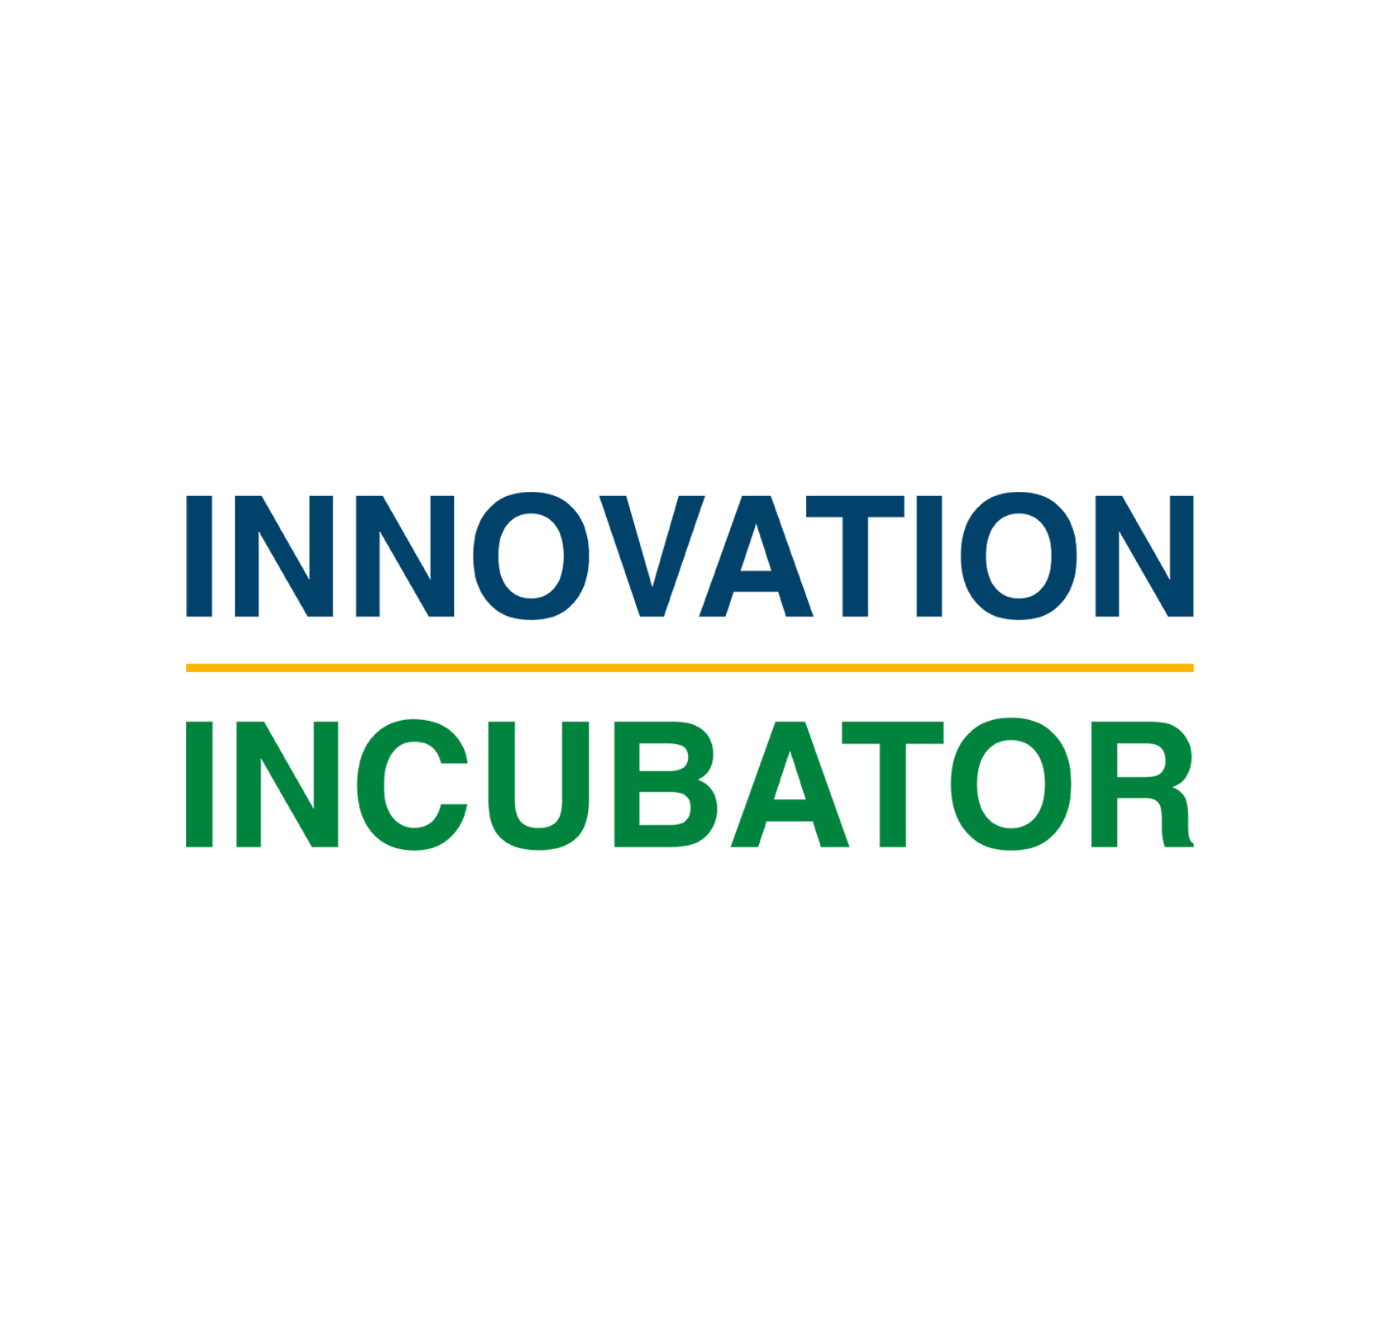 Receive Updates from the Innovation Incubator!